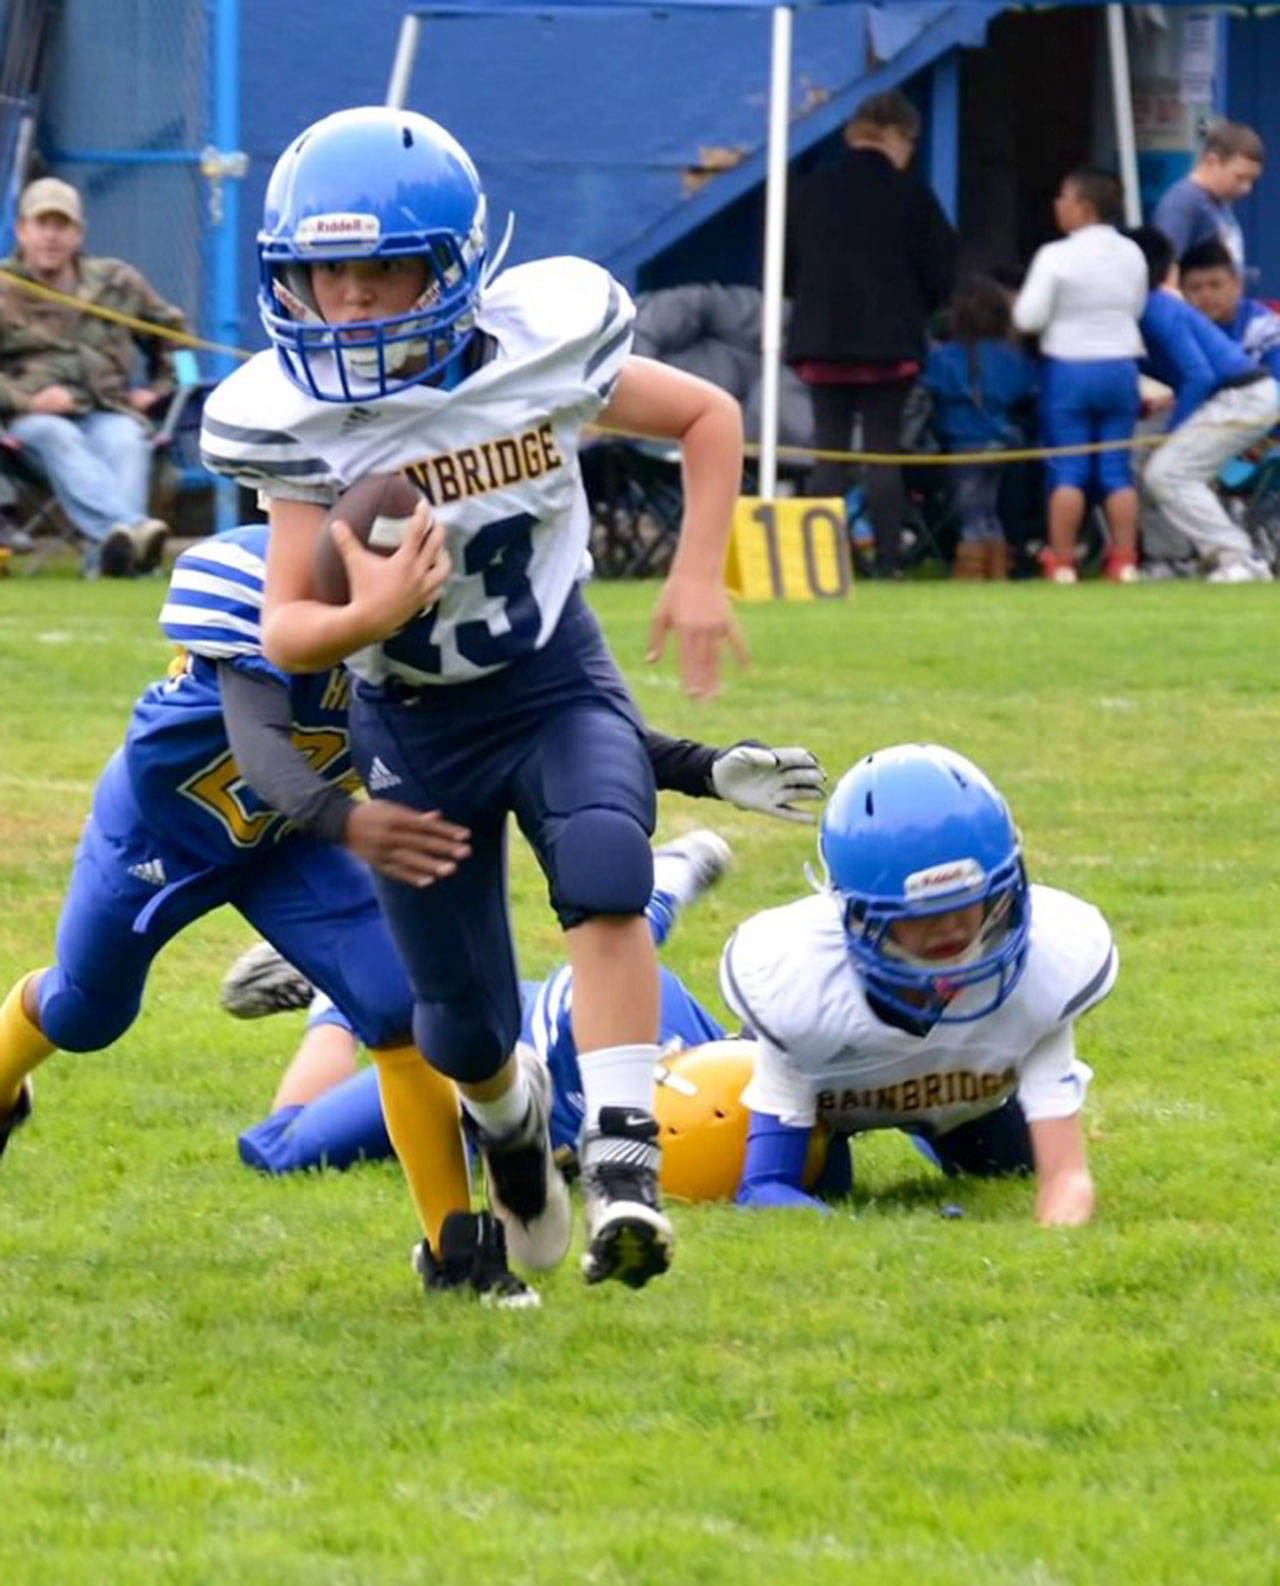 Photo courtesy of Jeff Rouser | The Bainbridge Island Junior Football Association recently announced they have joined the highly regarded Greater Eastside Junior Football Association.